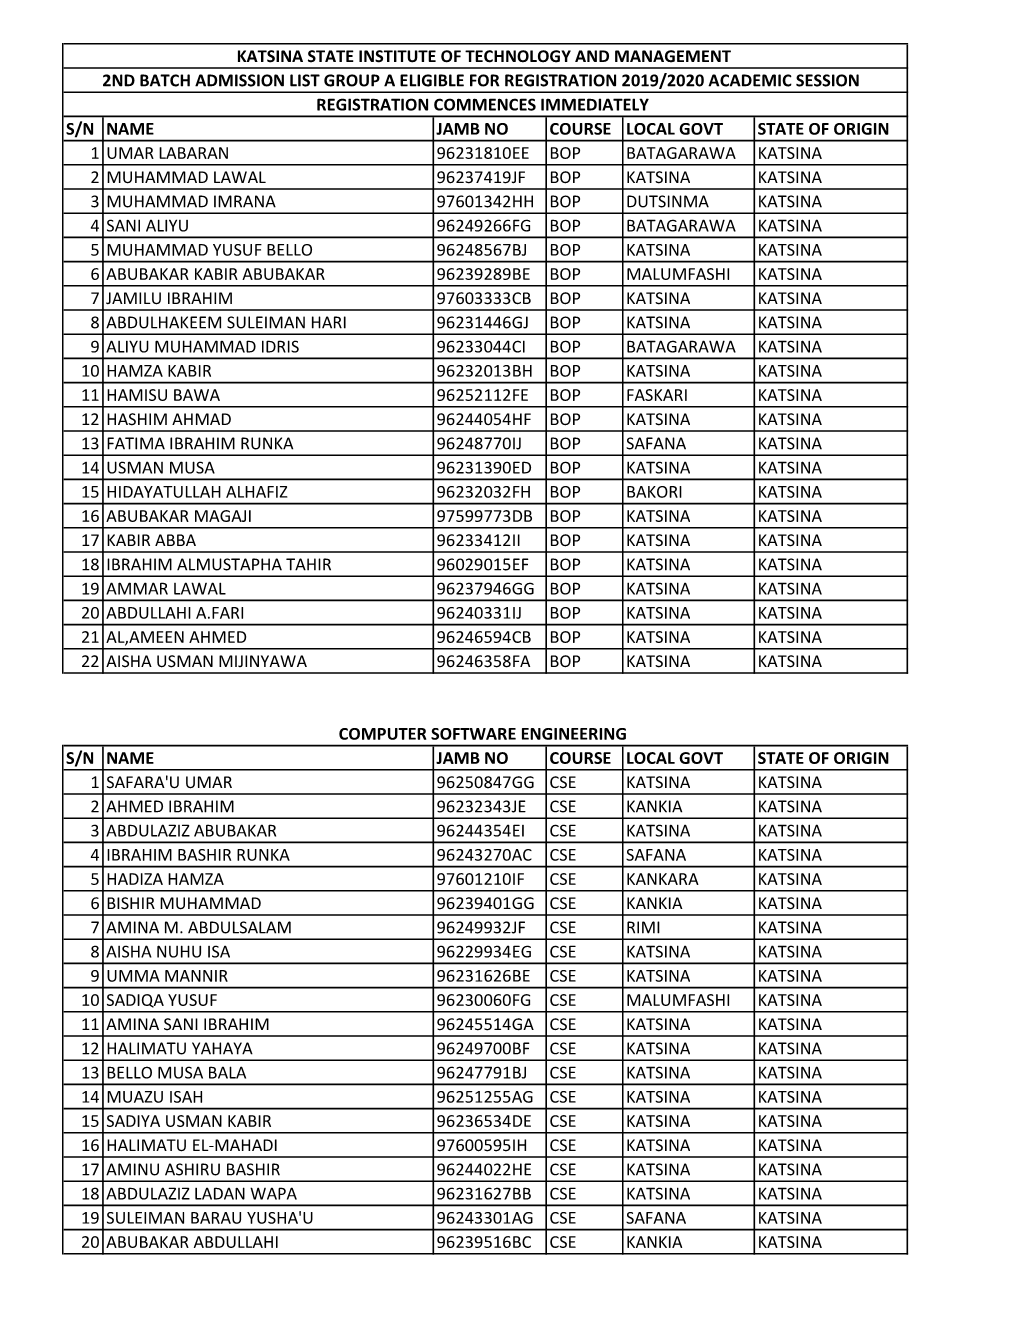 Group a Admission List